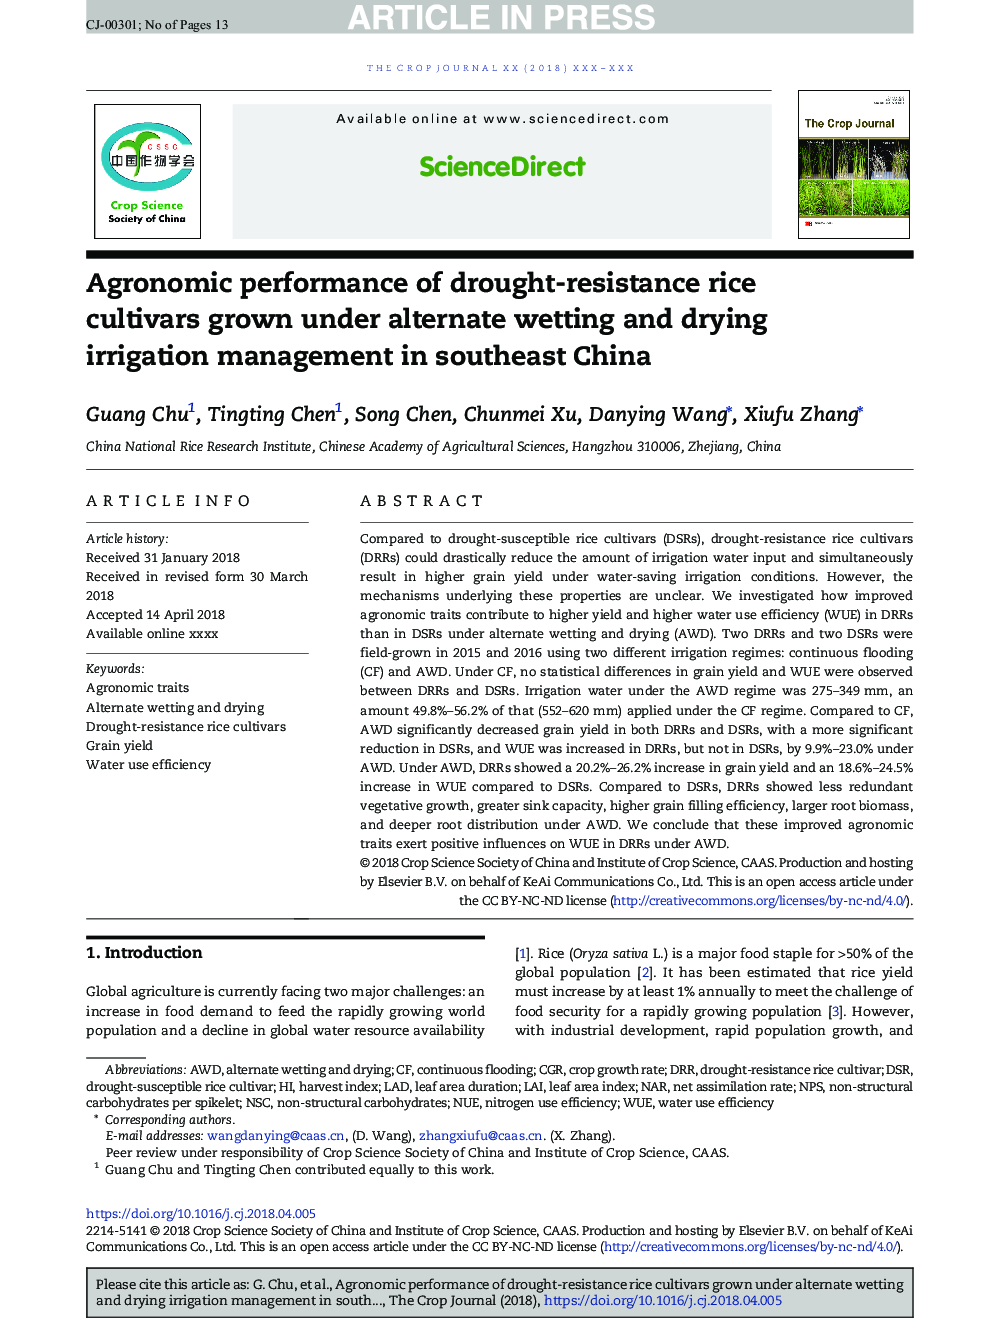 Agronomic performance of drought-resistance rice cultivars grown under alternate wetting and drying irrigation management in southeast China